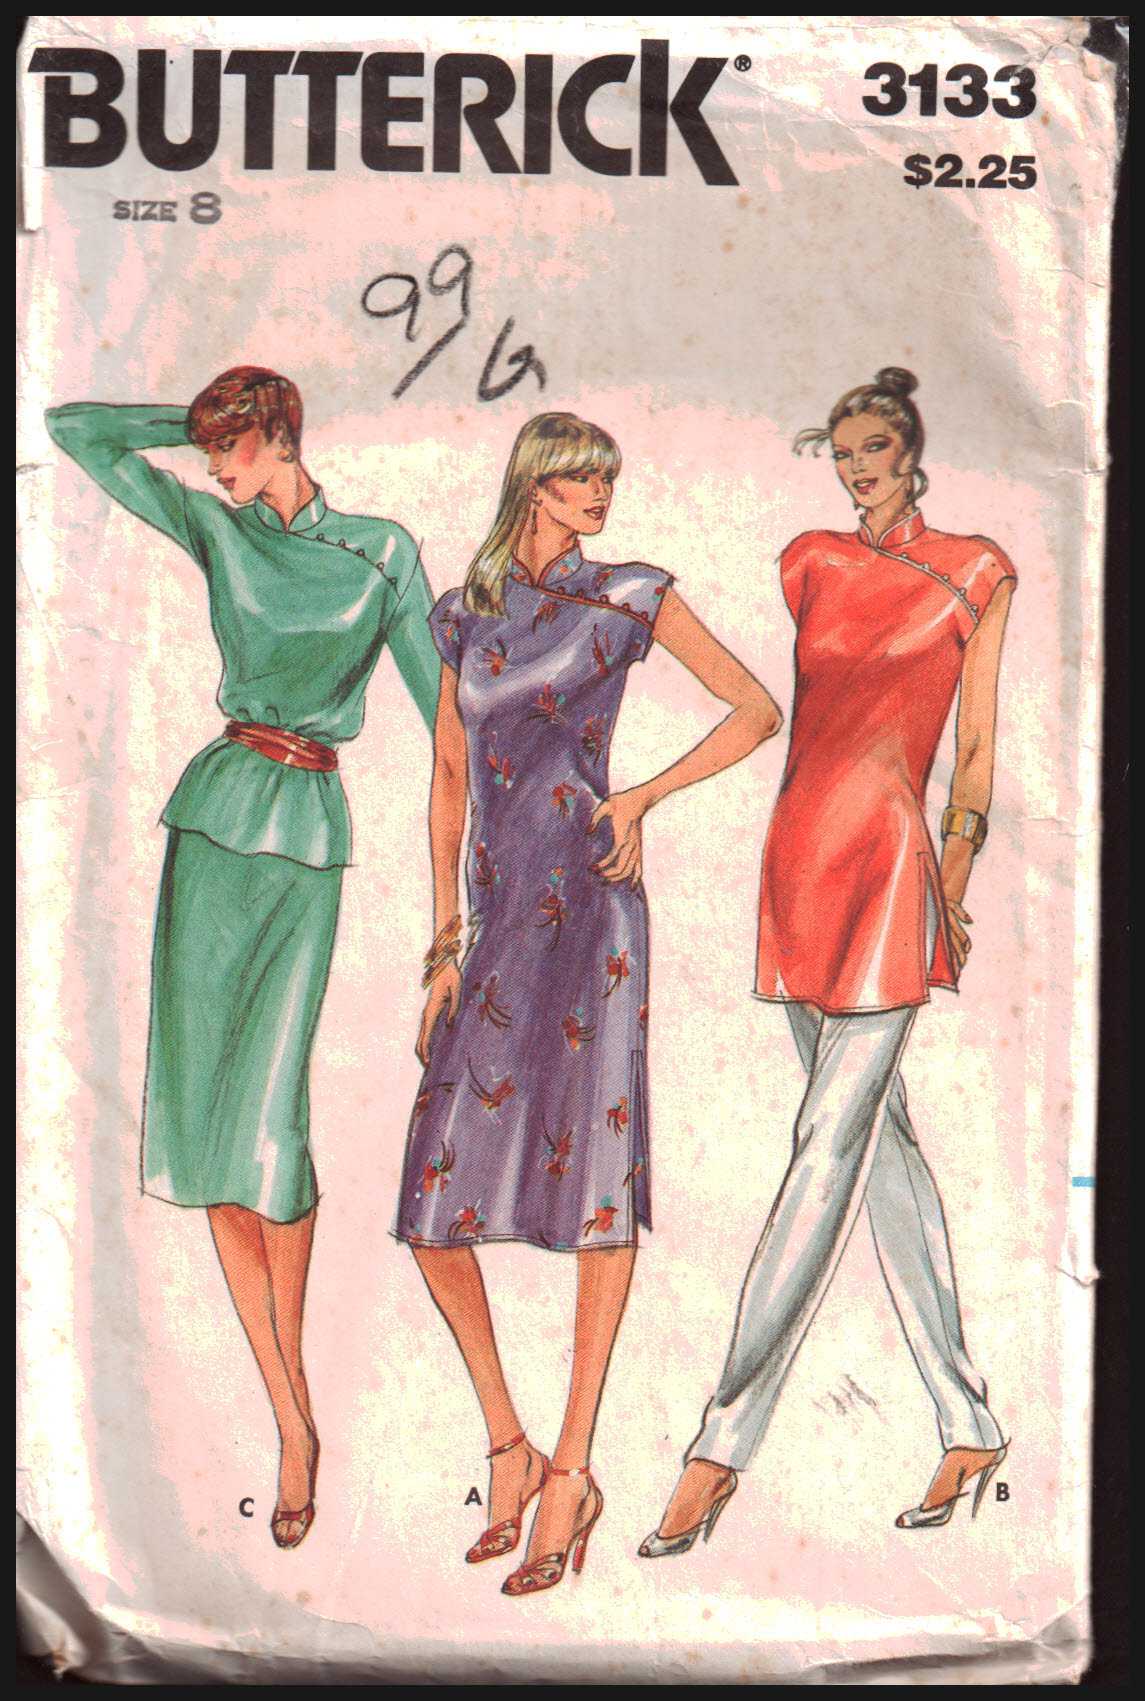 Butterick 3133 Dresses, Tunic, Tops, Skirts Size: 8 Used Sewing Pattern